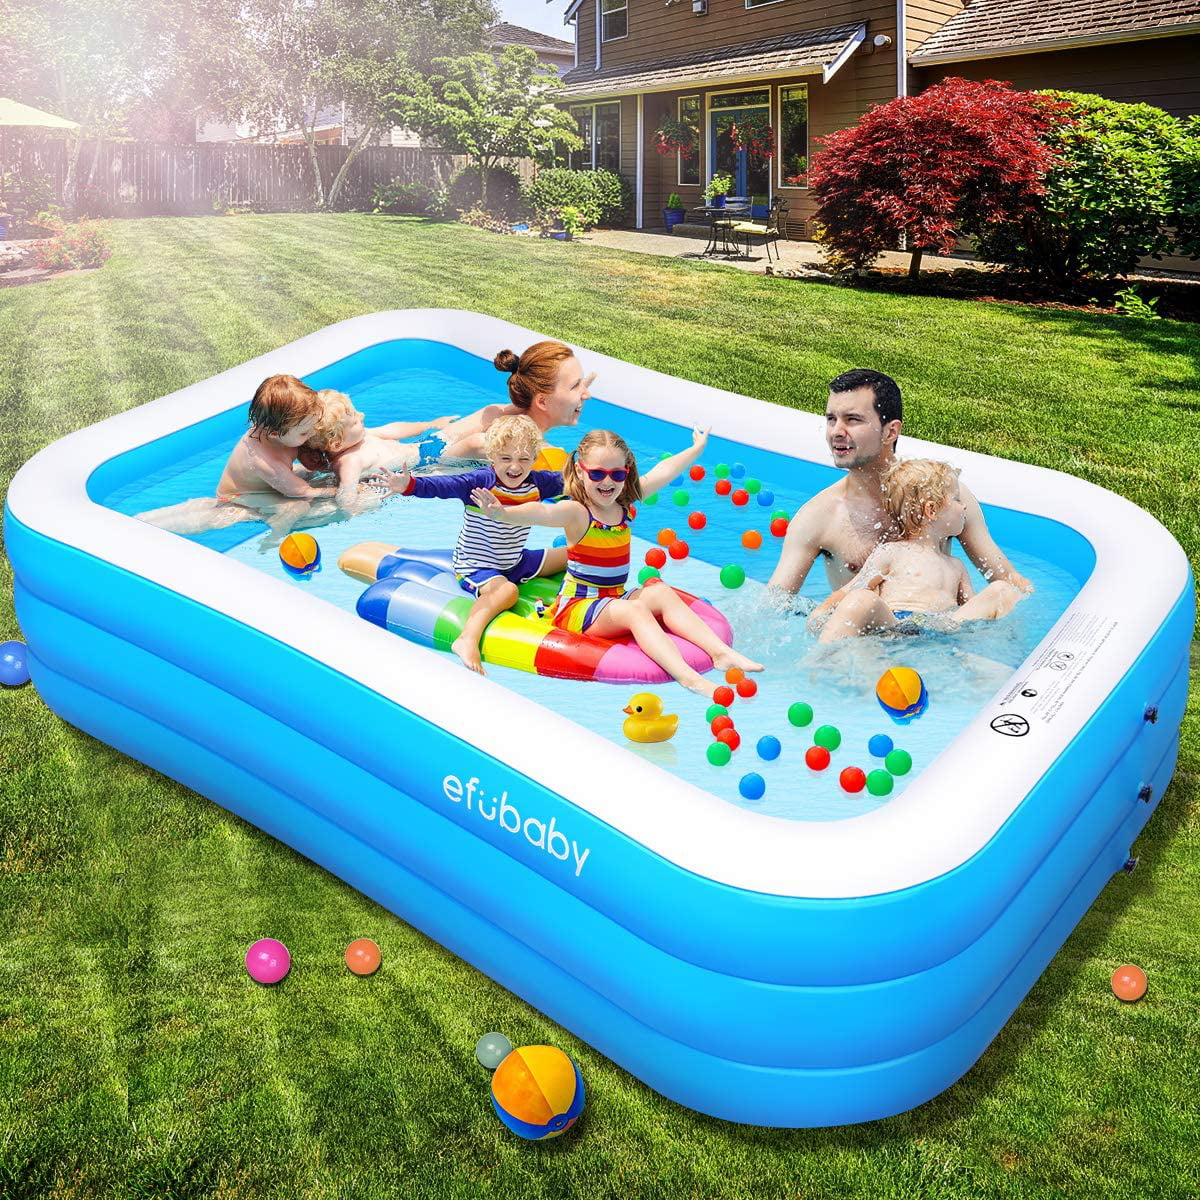 Inflatable Swimming Pools for Kids and Adults,120 X 72 X 20 Family Blow Up Pool for Kiddie,Adult Infant Garden Toddlers for Ages 3+,Above Ground Pool for Outdoor Backyard Summer Water Party